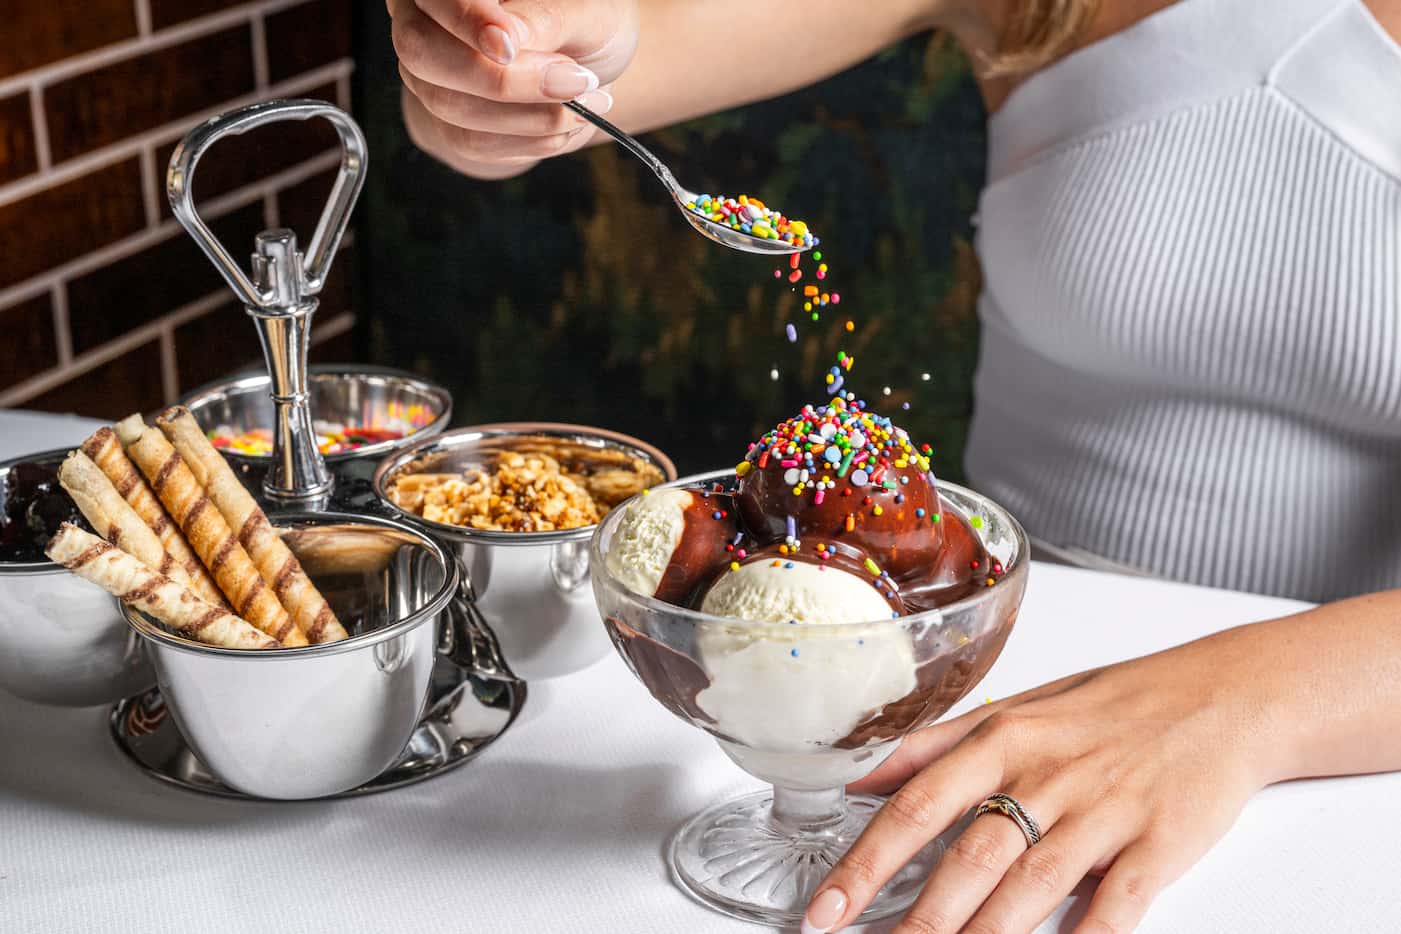 One of the four desserts on Mister Charles' menu is a sundae. It was created to honor the...